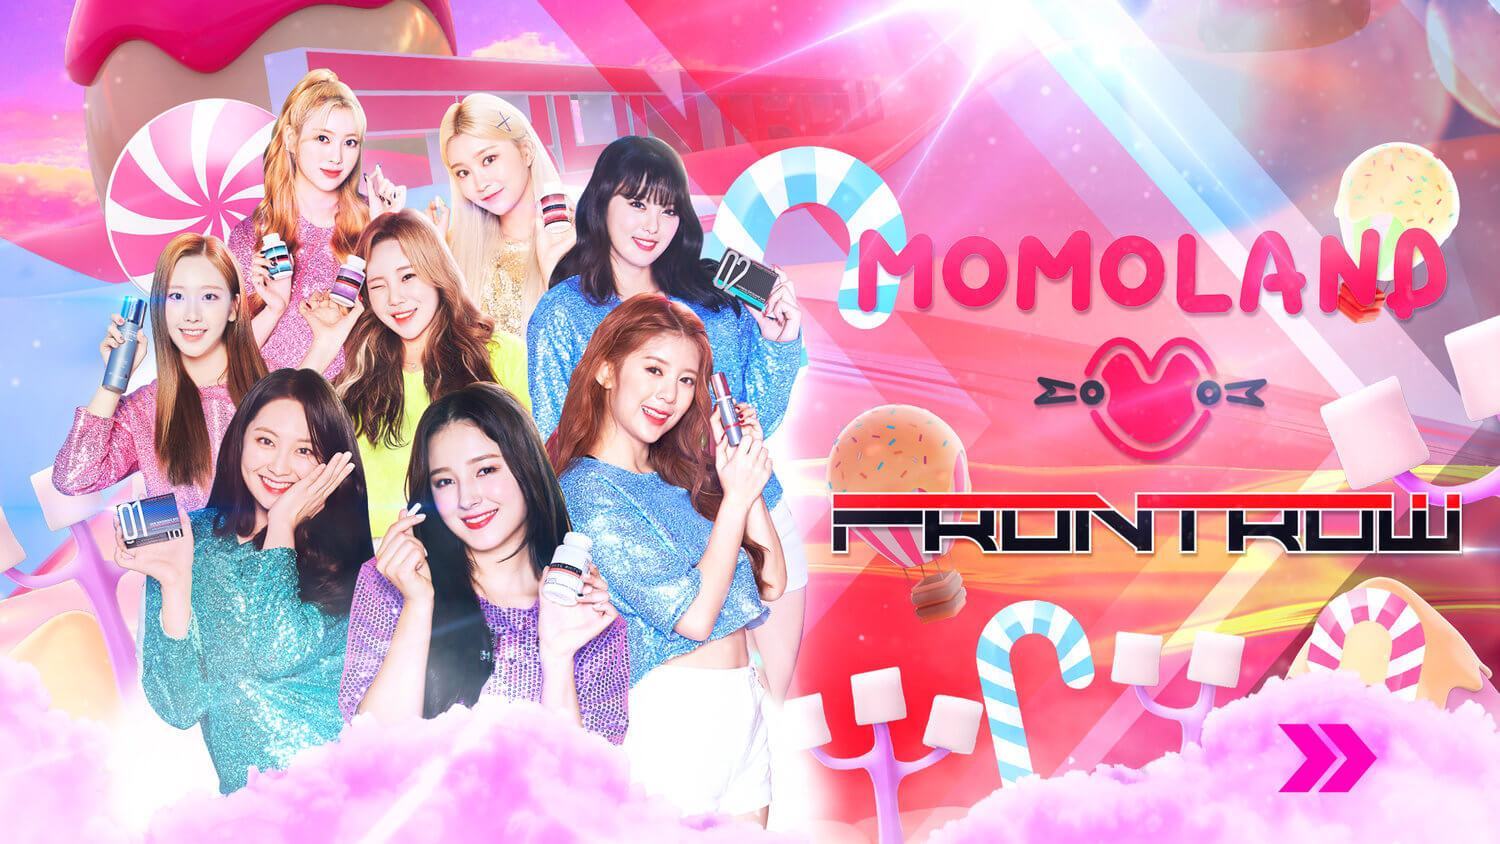 momoland is new frontrow international members